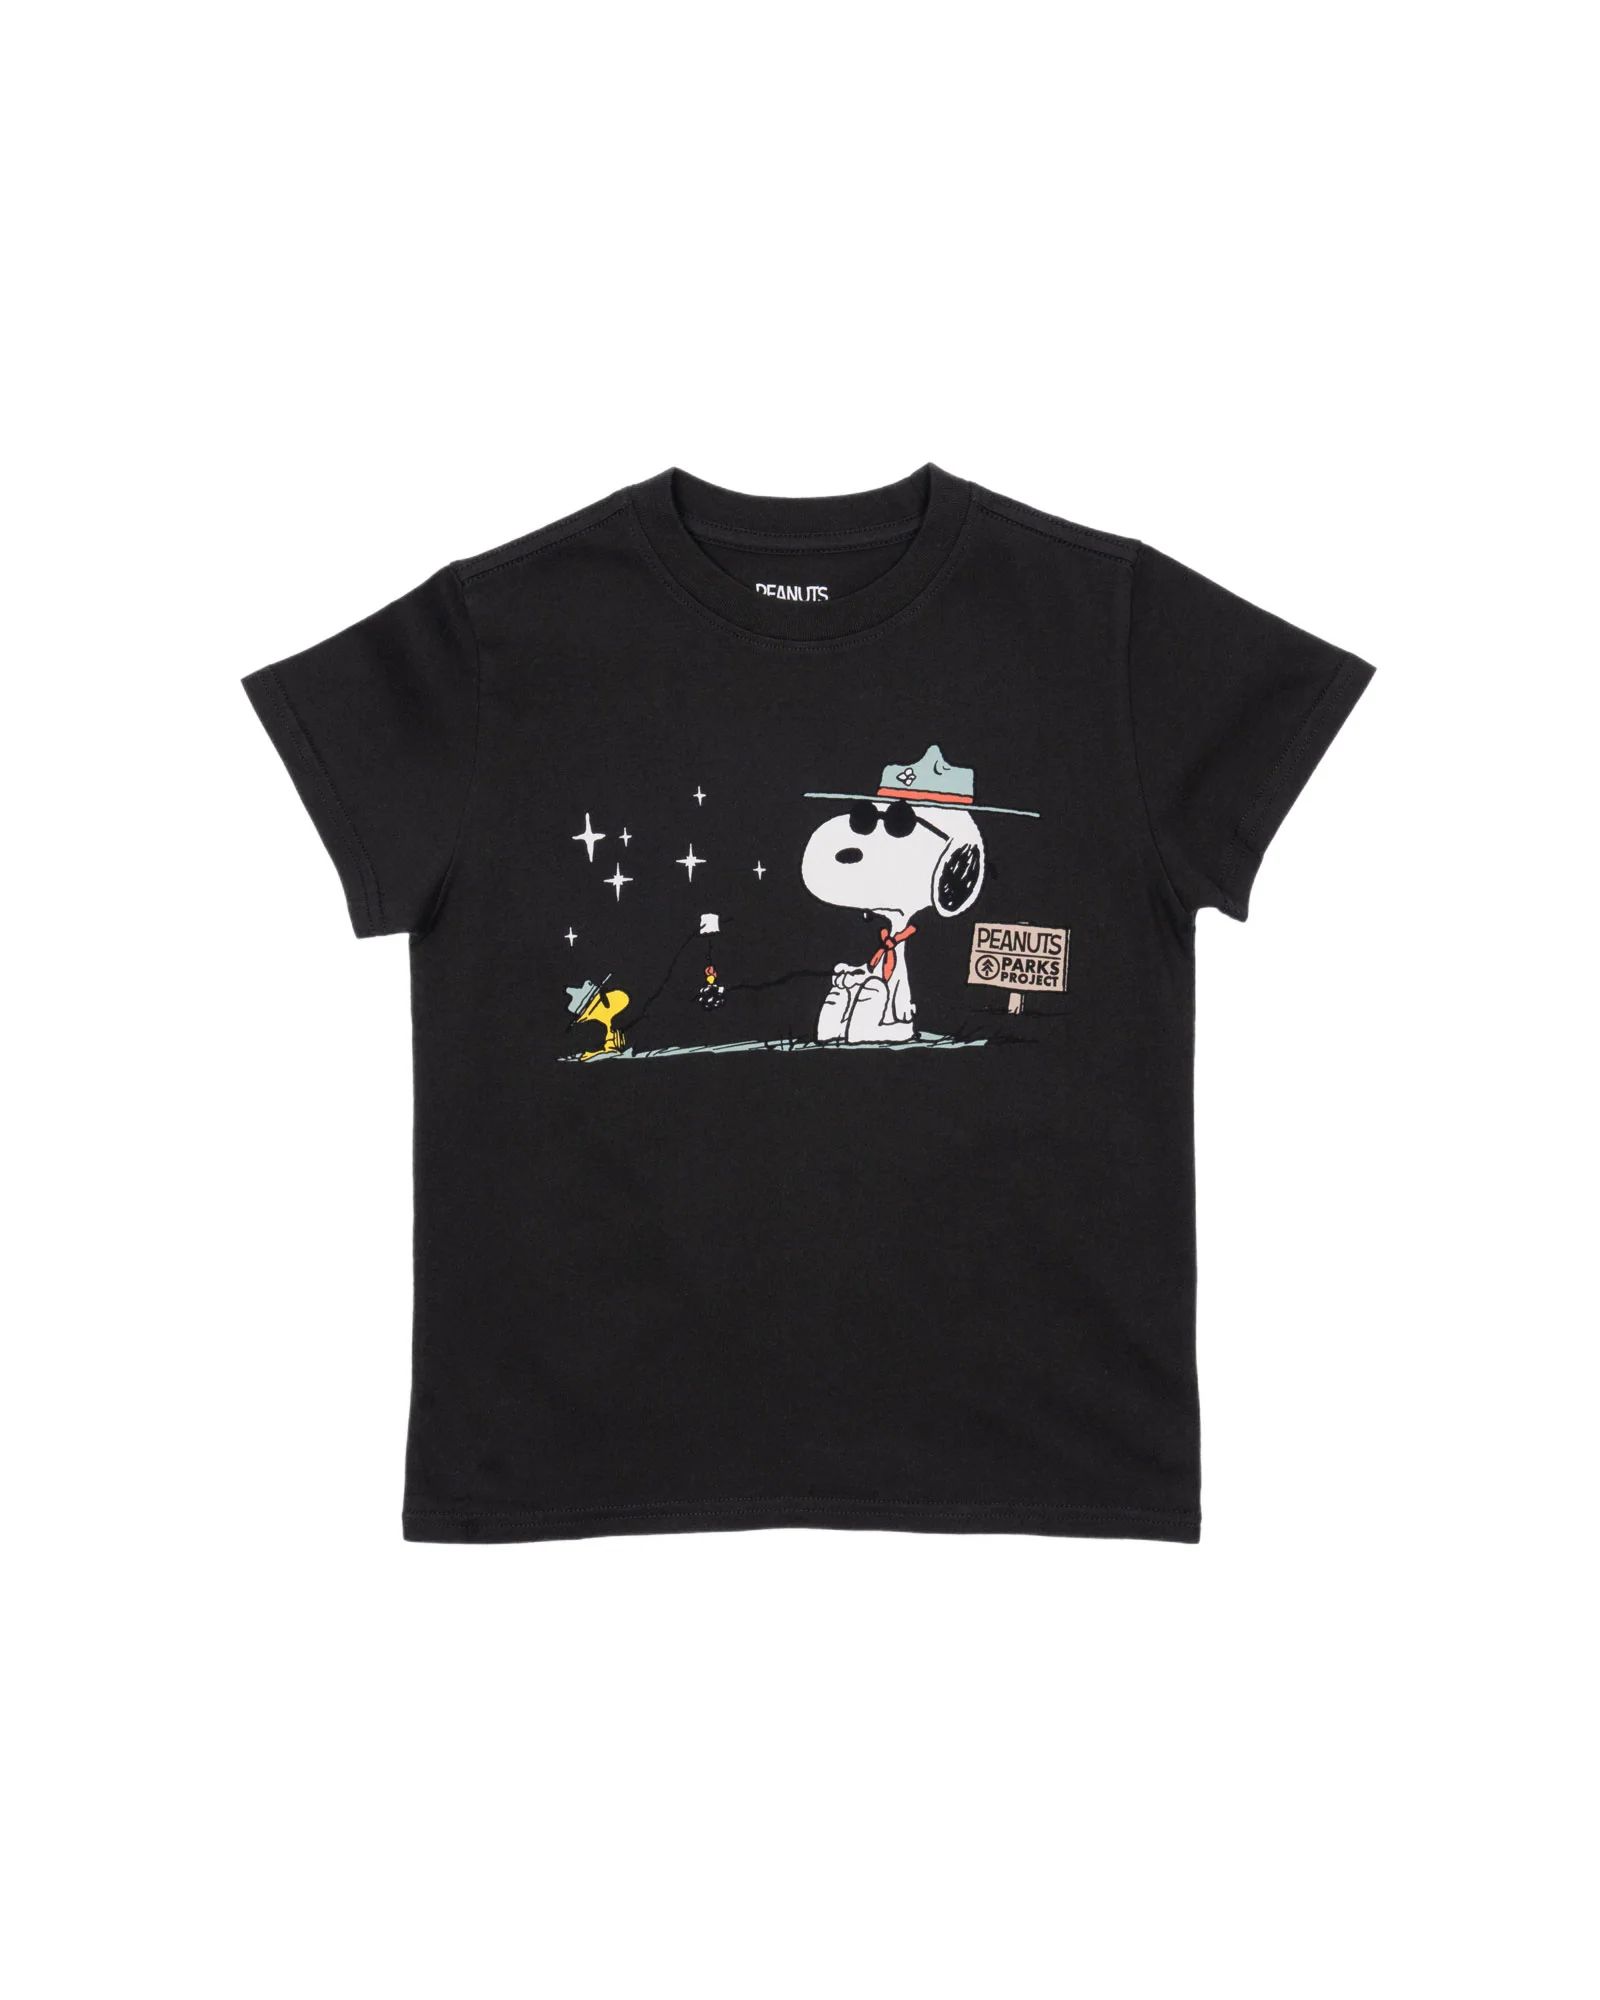 Peanuts x Parks Project Happy Campers Youth Tee | Parks Project